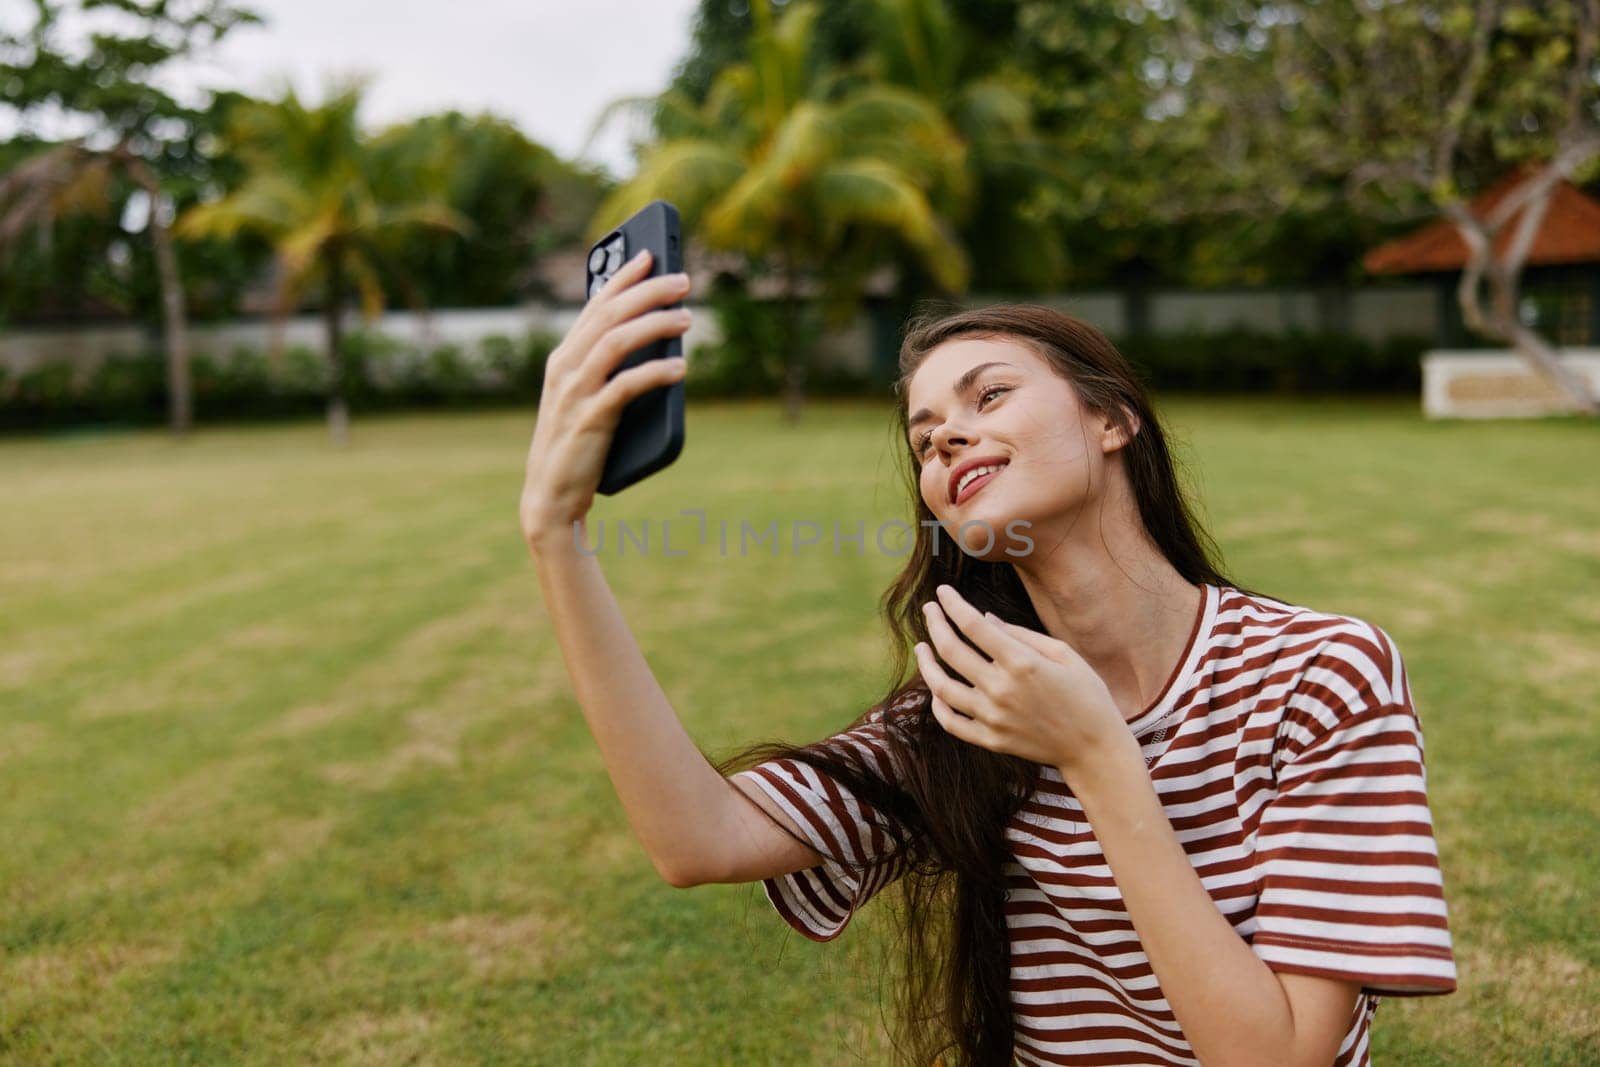 woman outside smiling palm person phone grass green tree park smart blogger nature working seasonal talk caucasian young spring talking happy lifestyle